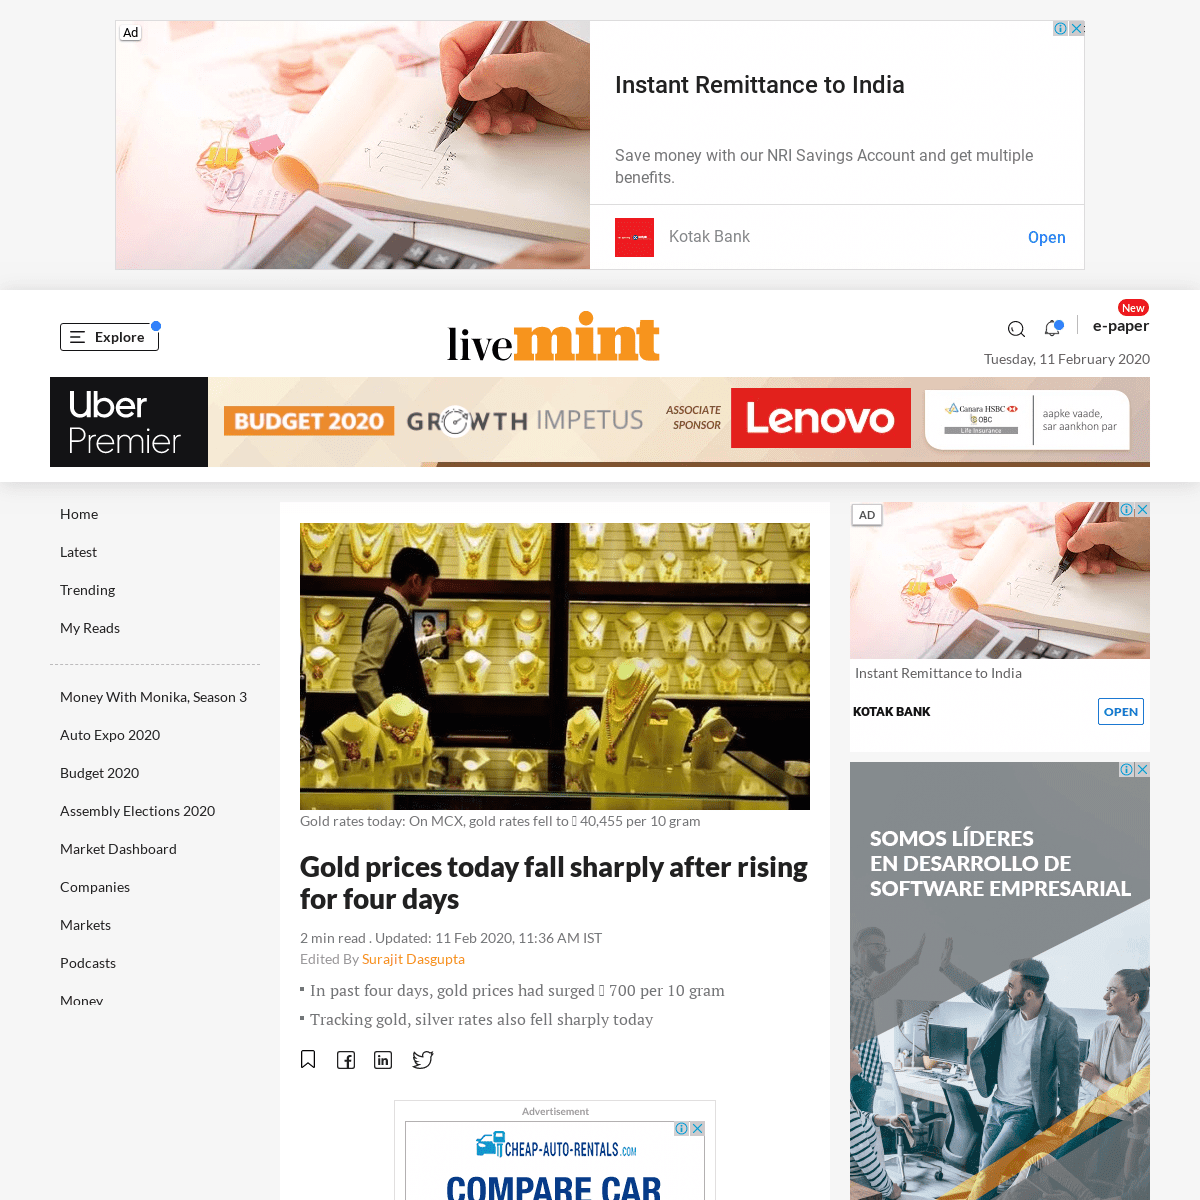 A complete backup of www.livemint.com/market/commodities/gold-prices-today-fall-sharply-after-rising-for-four-days-1158139024254